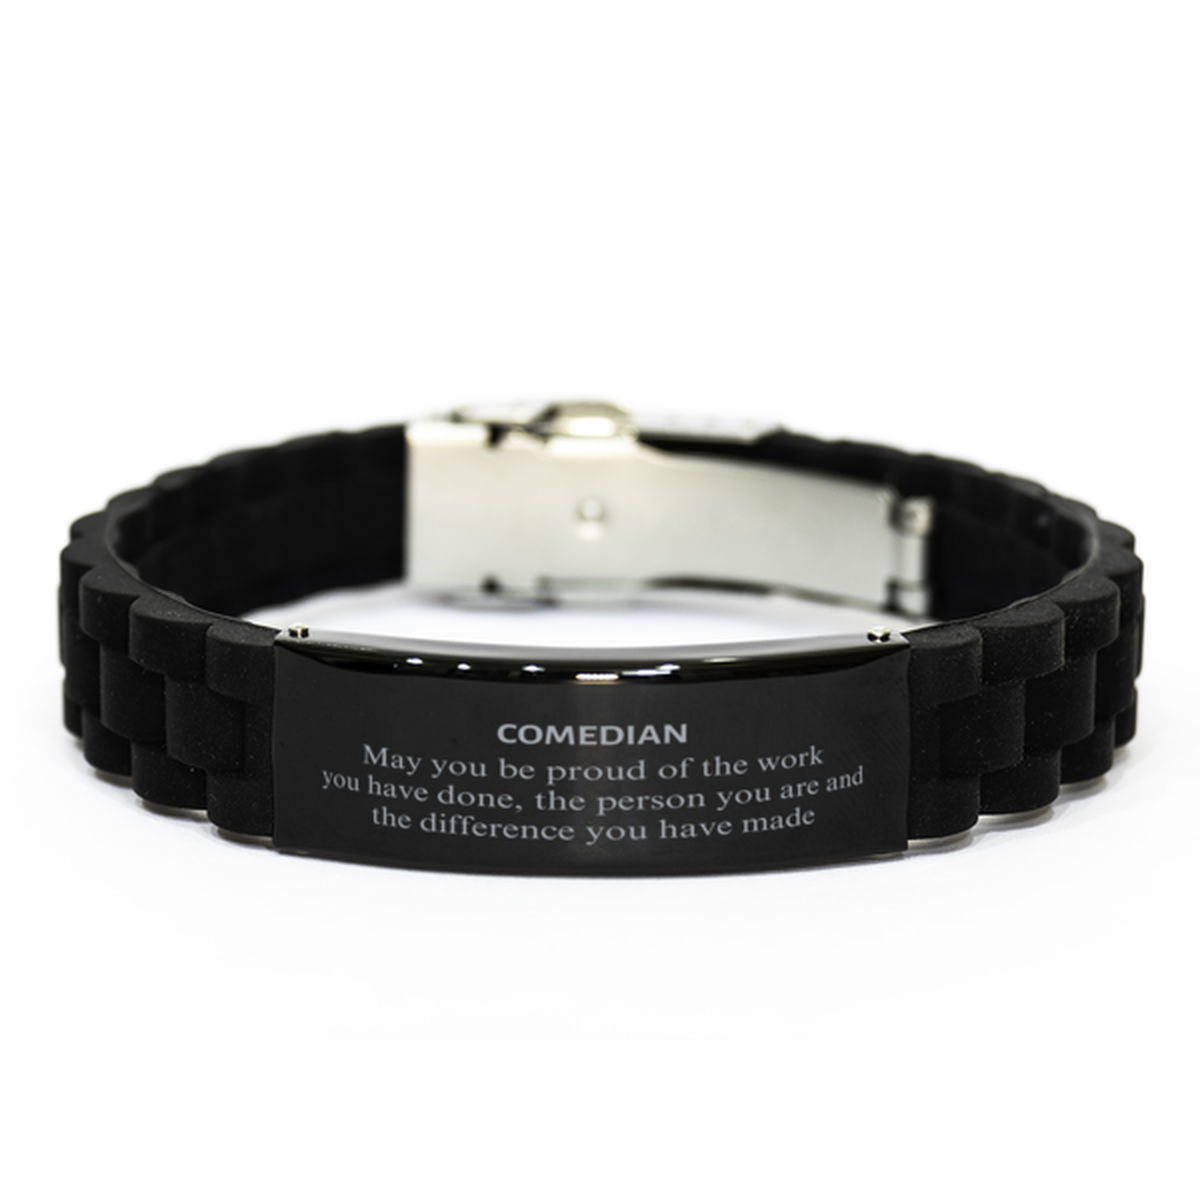 Comedian May you be proud of the work you have done, Retirement Comedian Black Glidelock Clasp Bracelet for Colleague Appreciation Gifts Amazing for Comedian